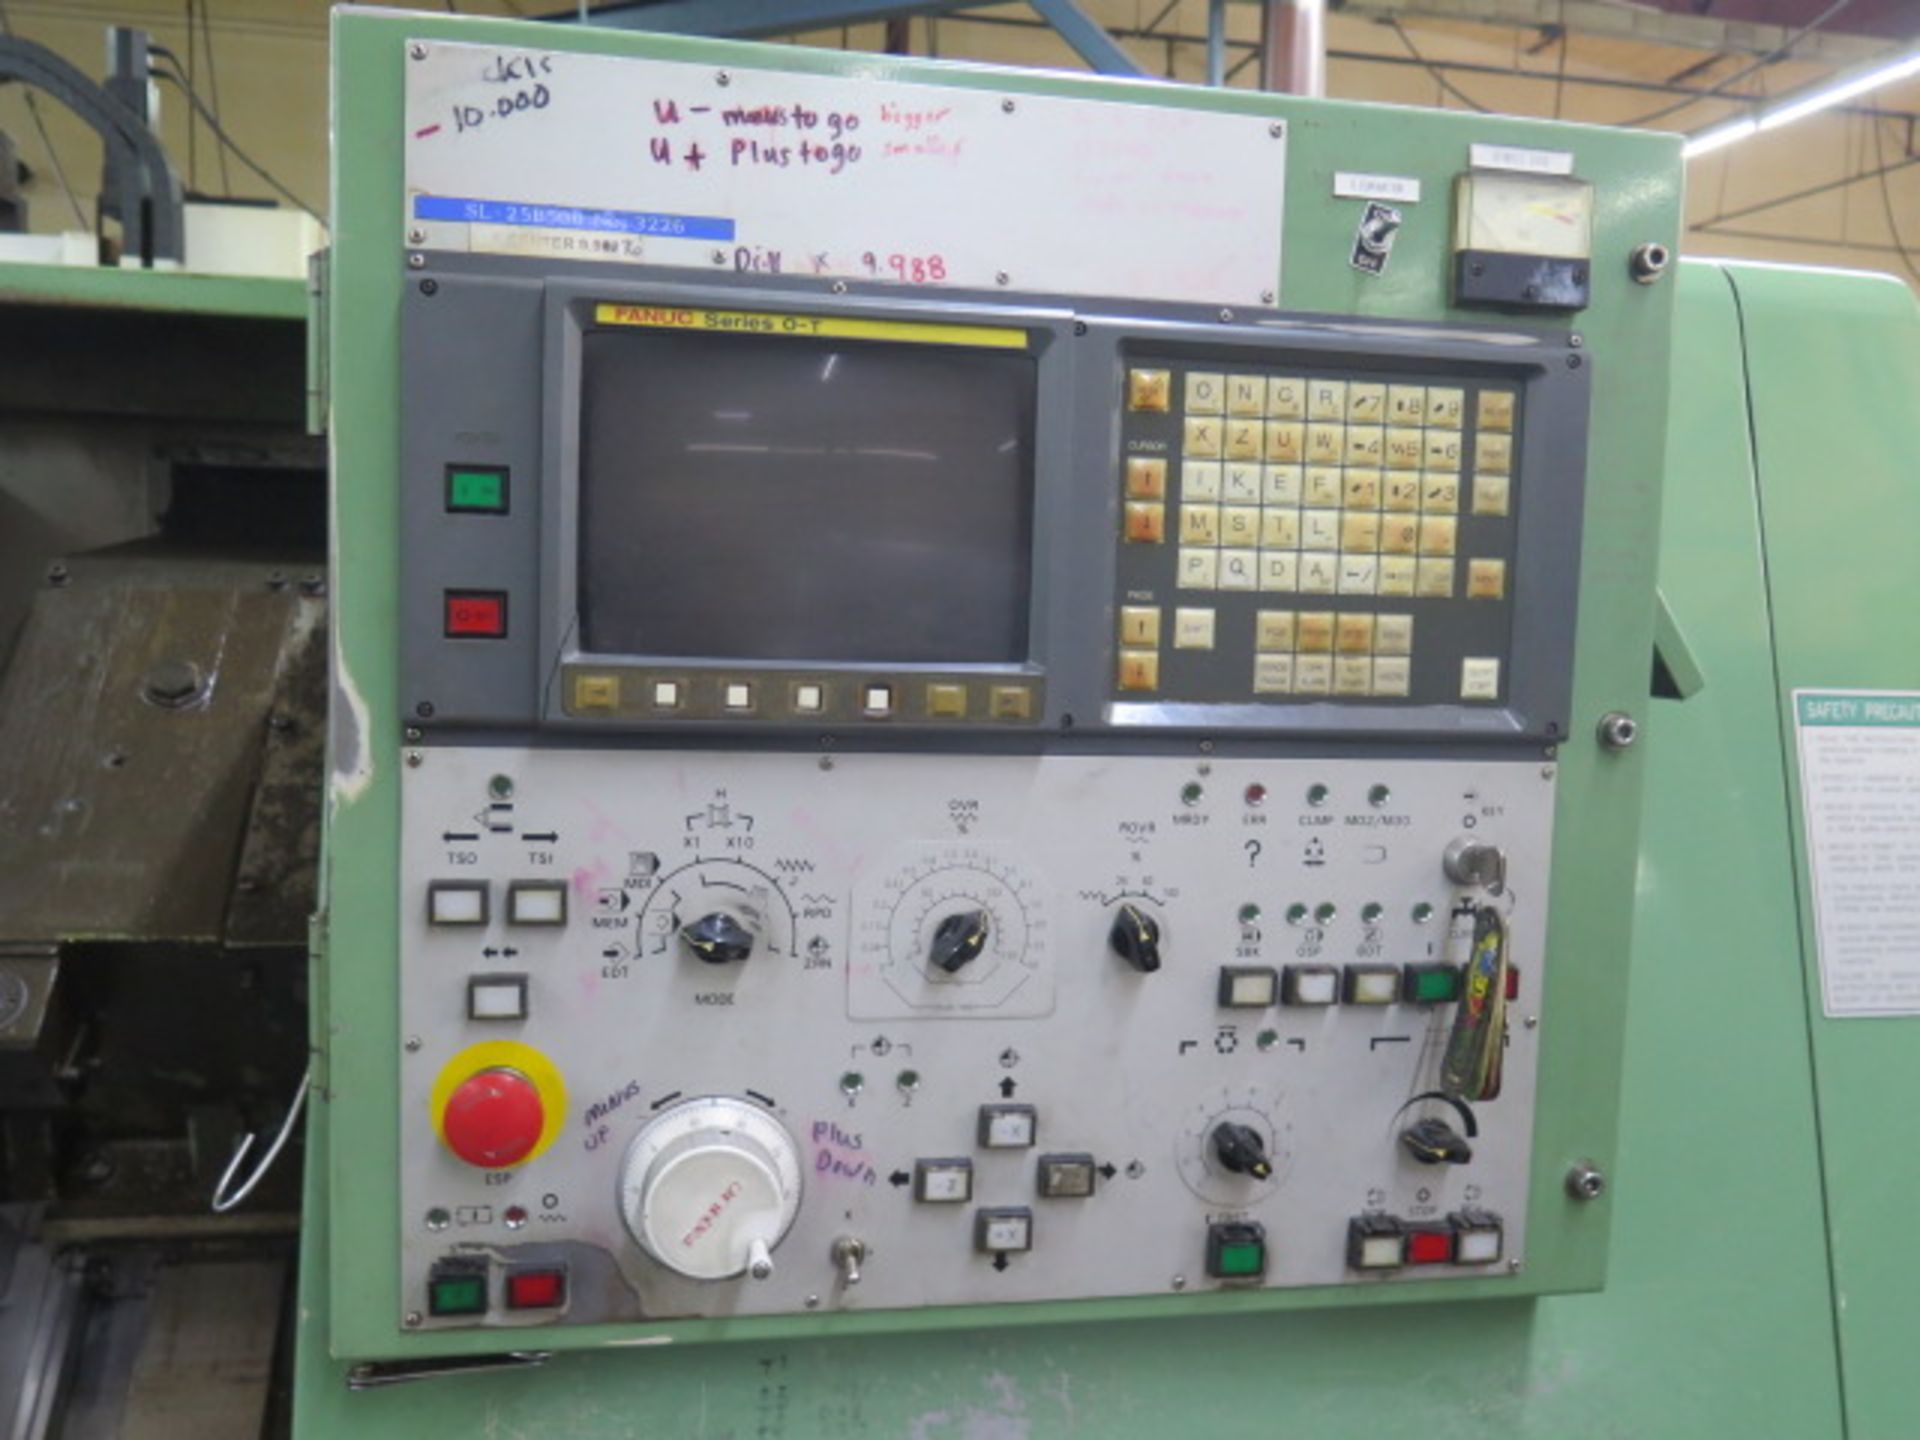 Mori Seiki SL-25 CNC Turning Center s/n 3226 w/ Fanuc 0-T Controls, 10-Station Turret, SOLD AS IS - Image 9 of 14